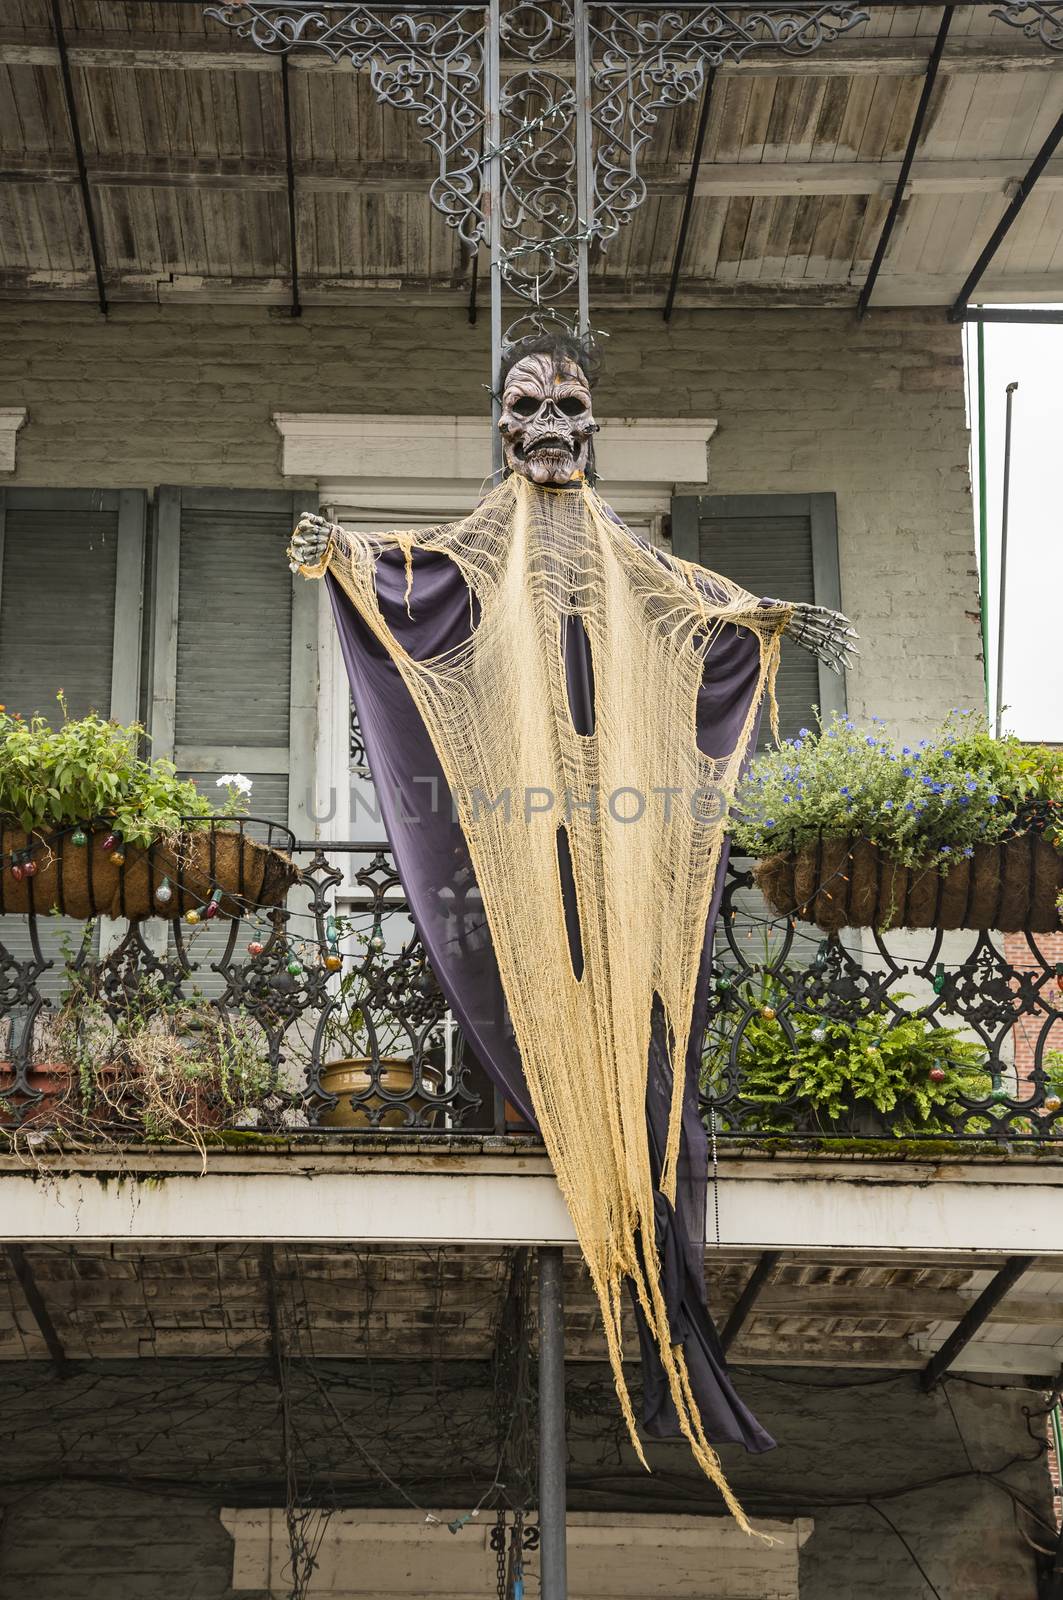 Halloween decorations on a balcony in New Orleans